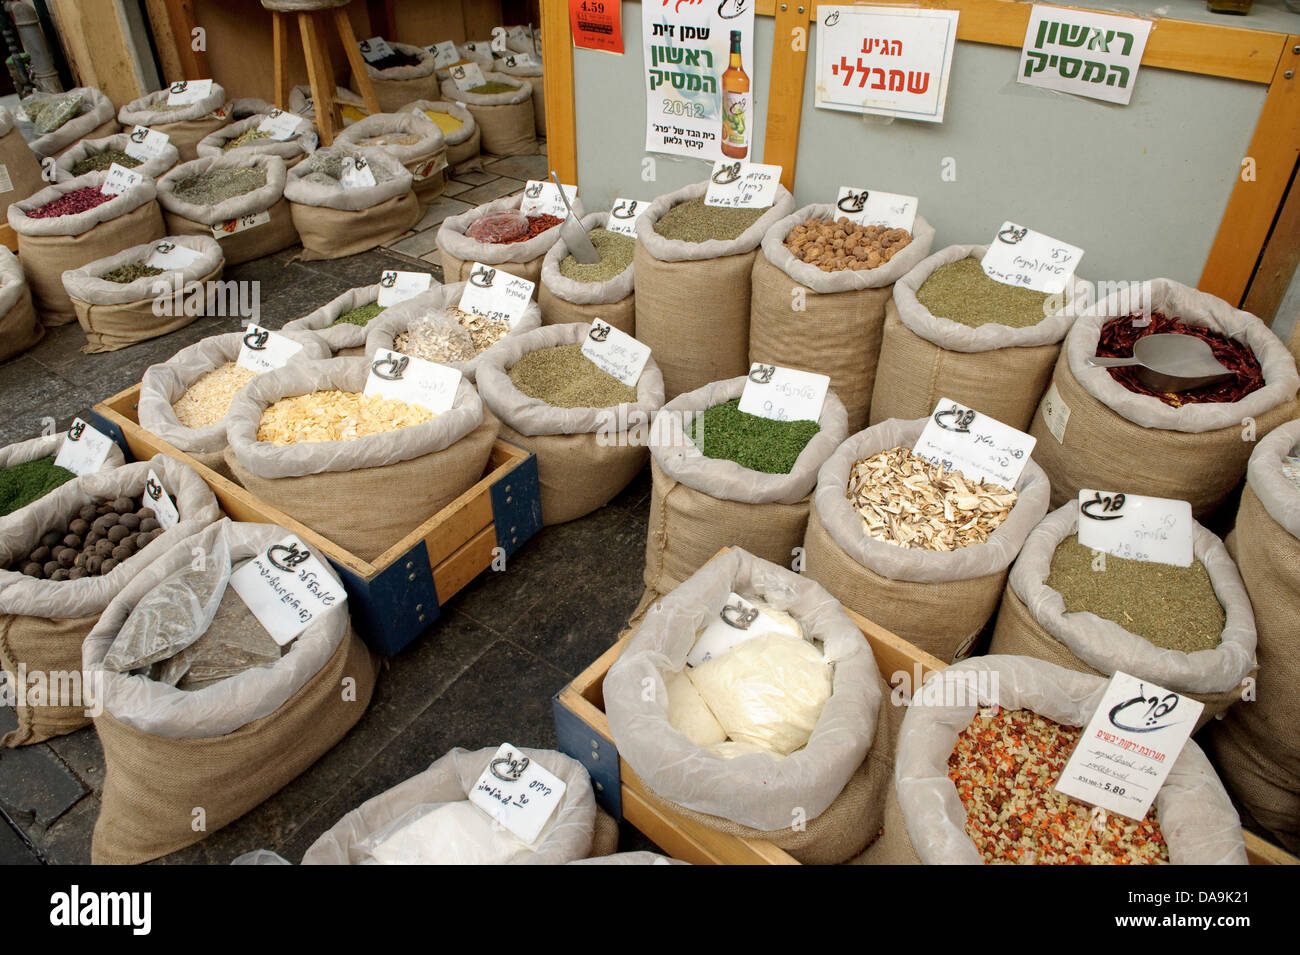 Spices, Israel, Jerusalem, baskets, market, Middle East, Near East, bags,  food, eating Stock Photo - Alamy